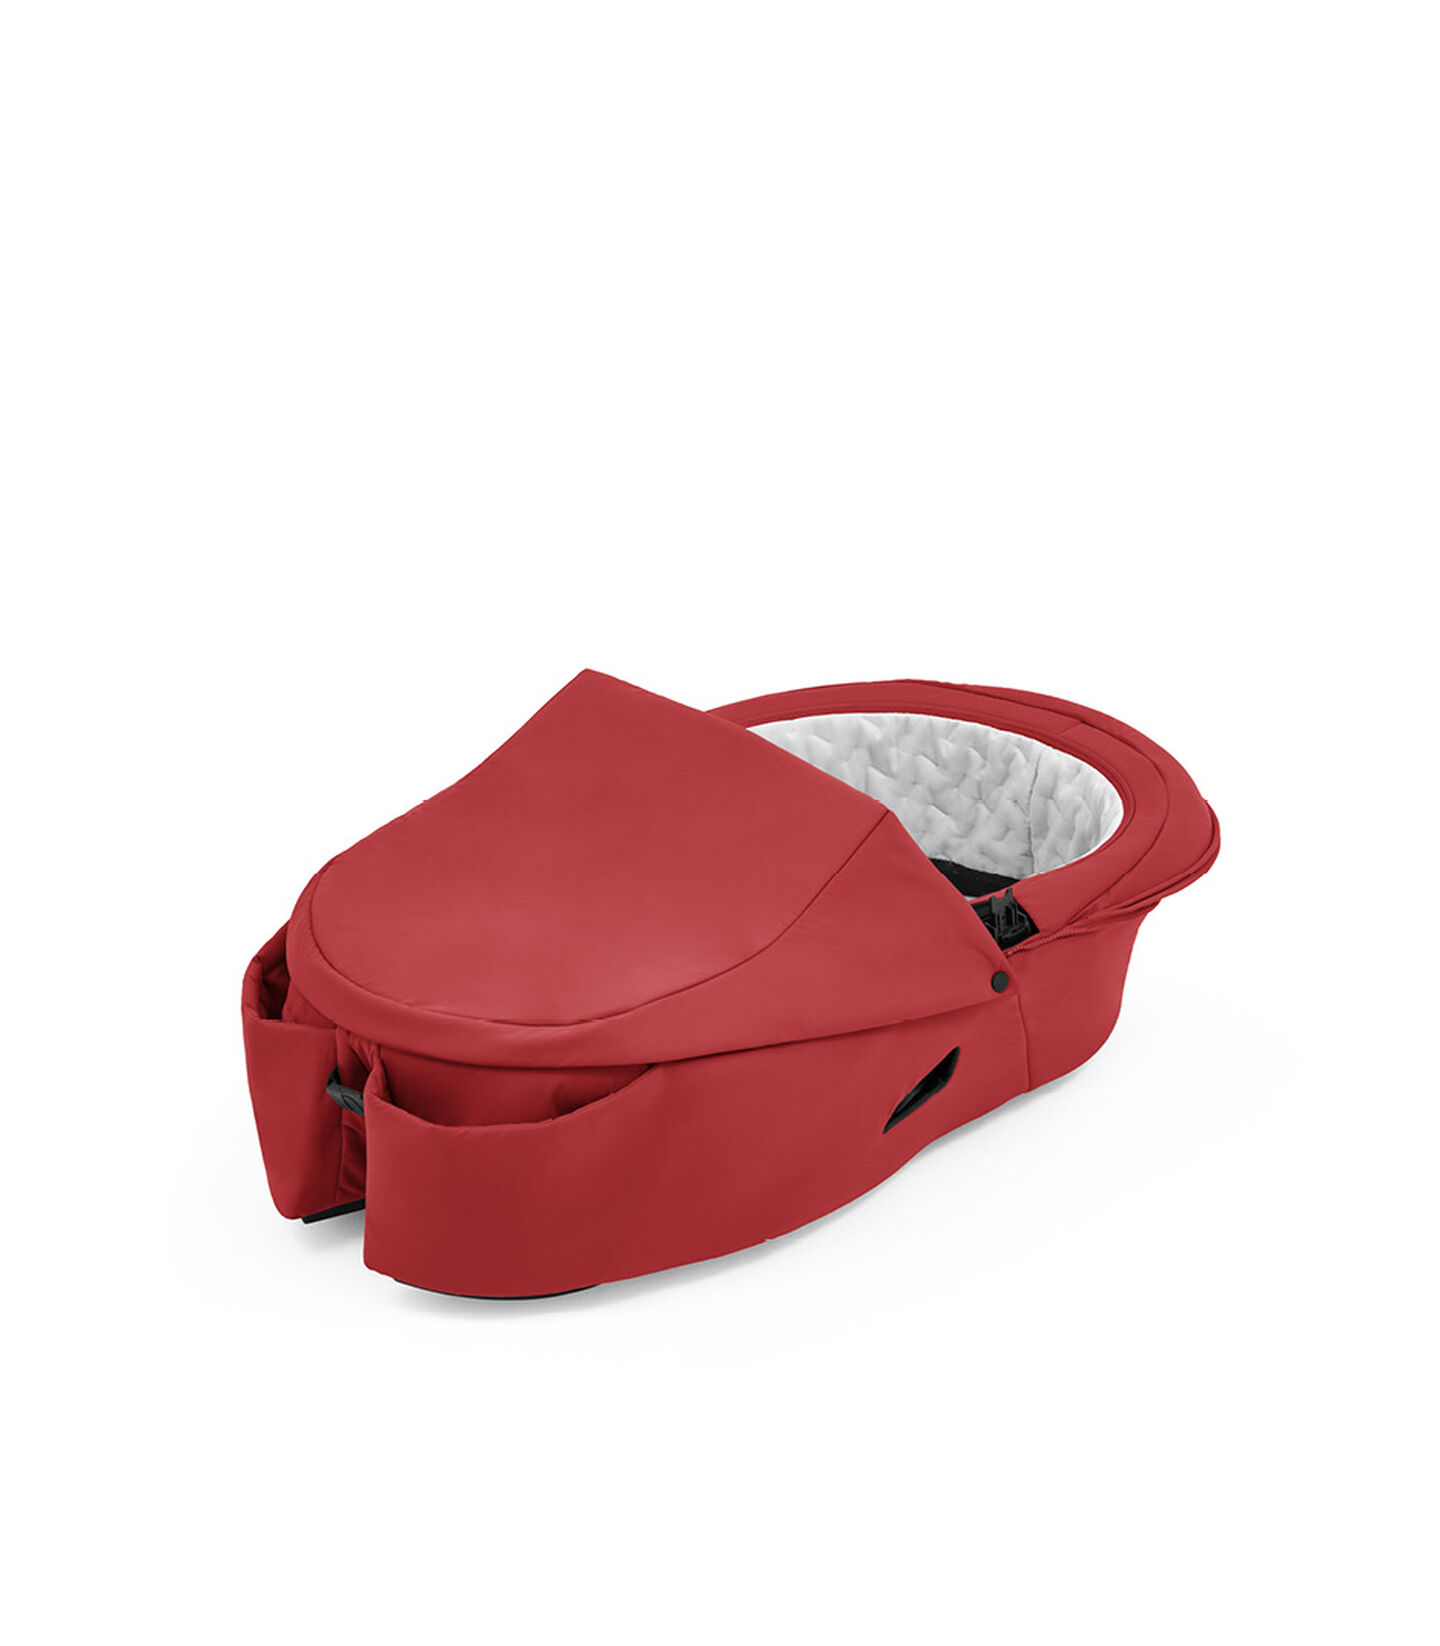 Stokke® Xplory® X Carry Cot Ruby Red, Ruby Red, mainview view 1